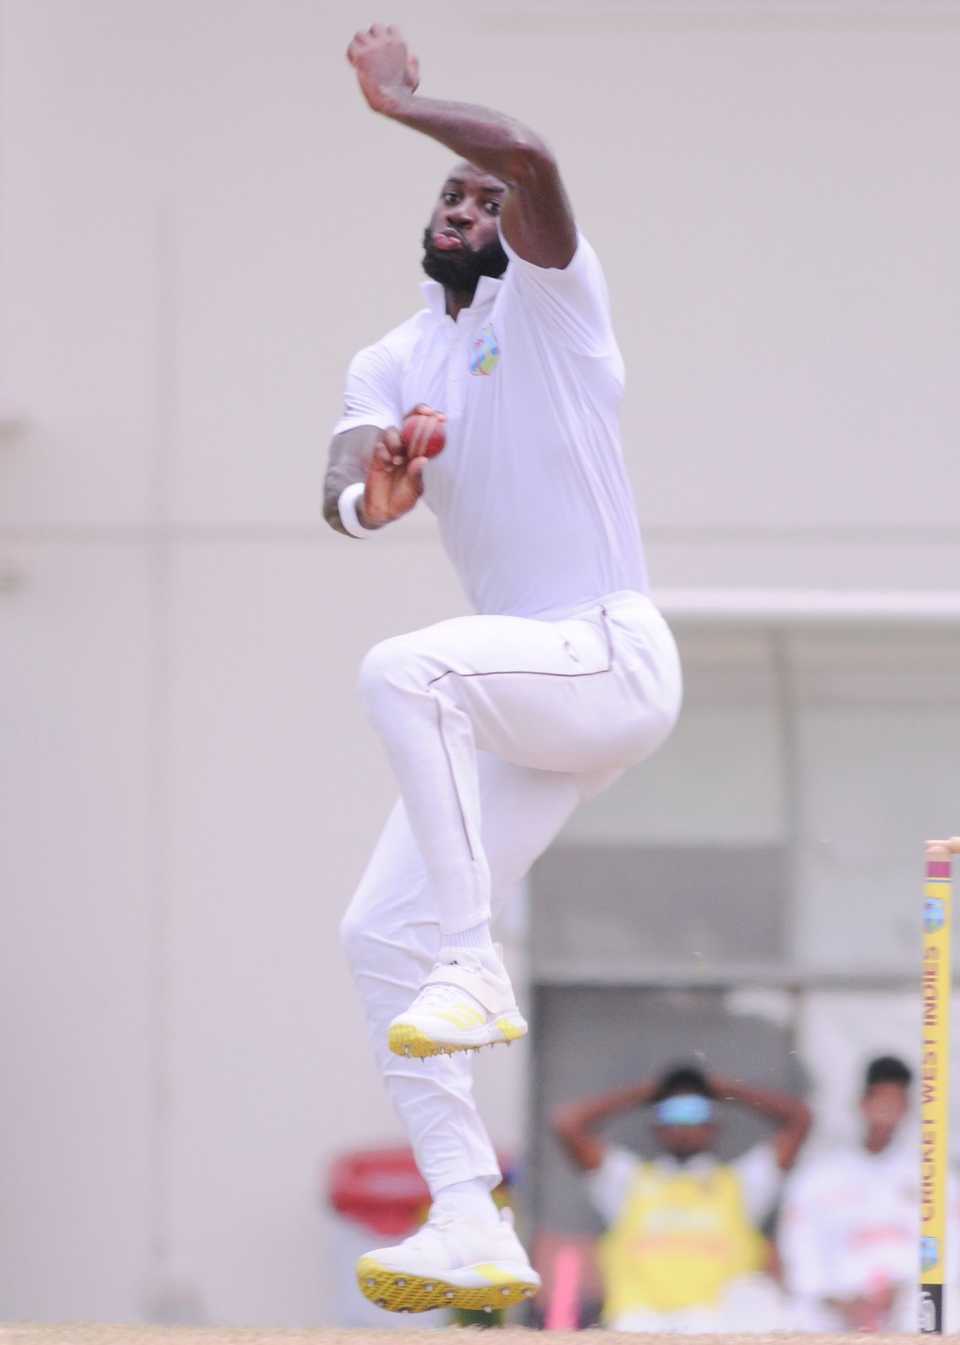 Anderson Phillip picked up three wickets, West Indies A vs Bangladesh A, 2nd unofficial Test, Gros Islet, 3rd day, August 13, 2022